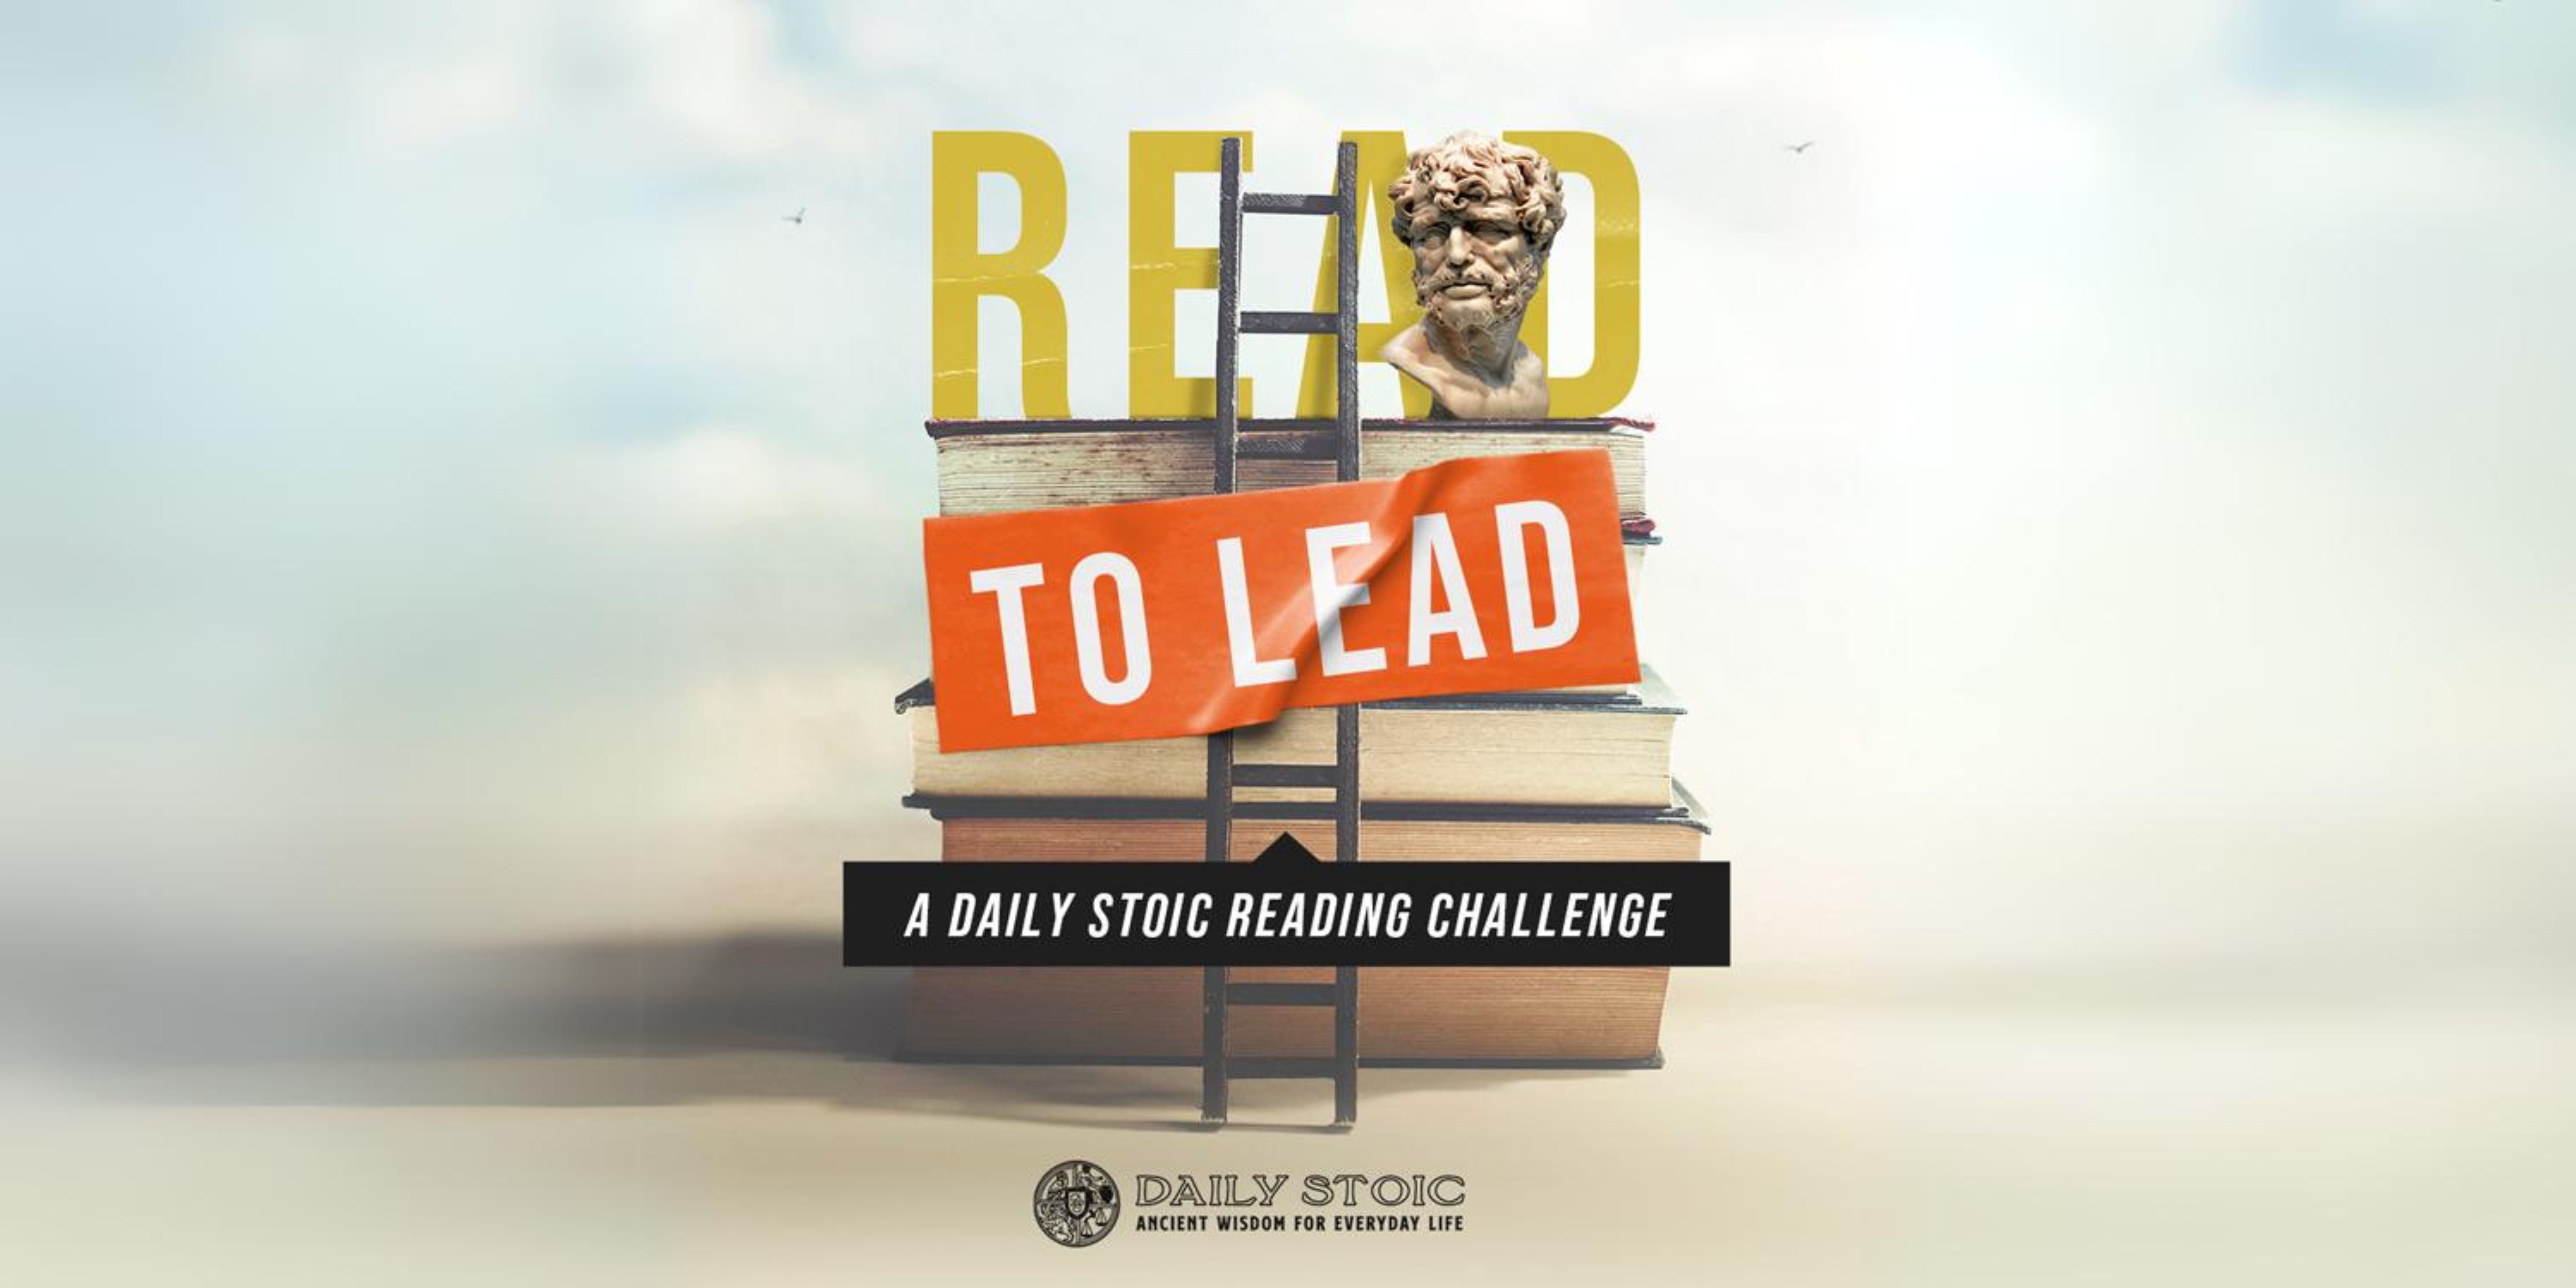 Daily Stoic New Year New You Challenge - Week 1 of 3 - What Is Stoicism?